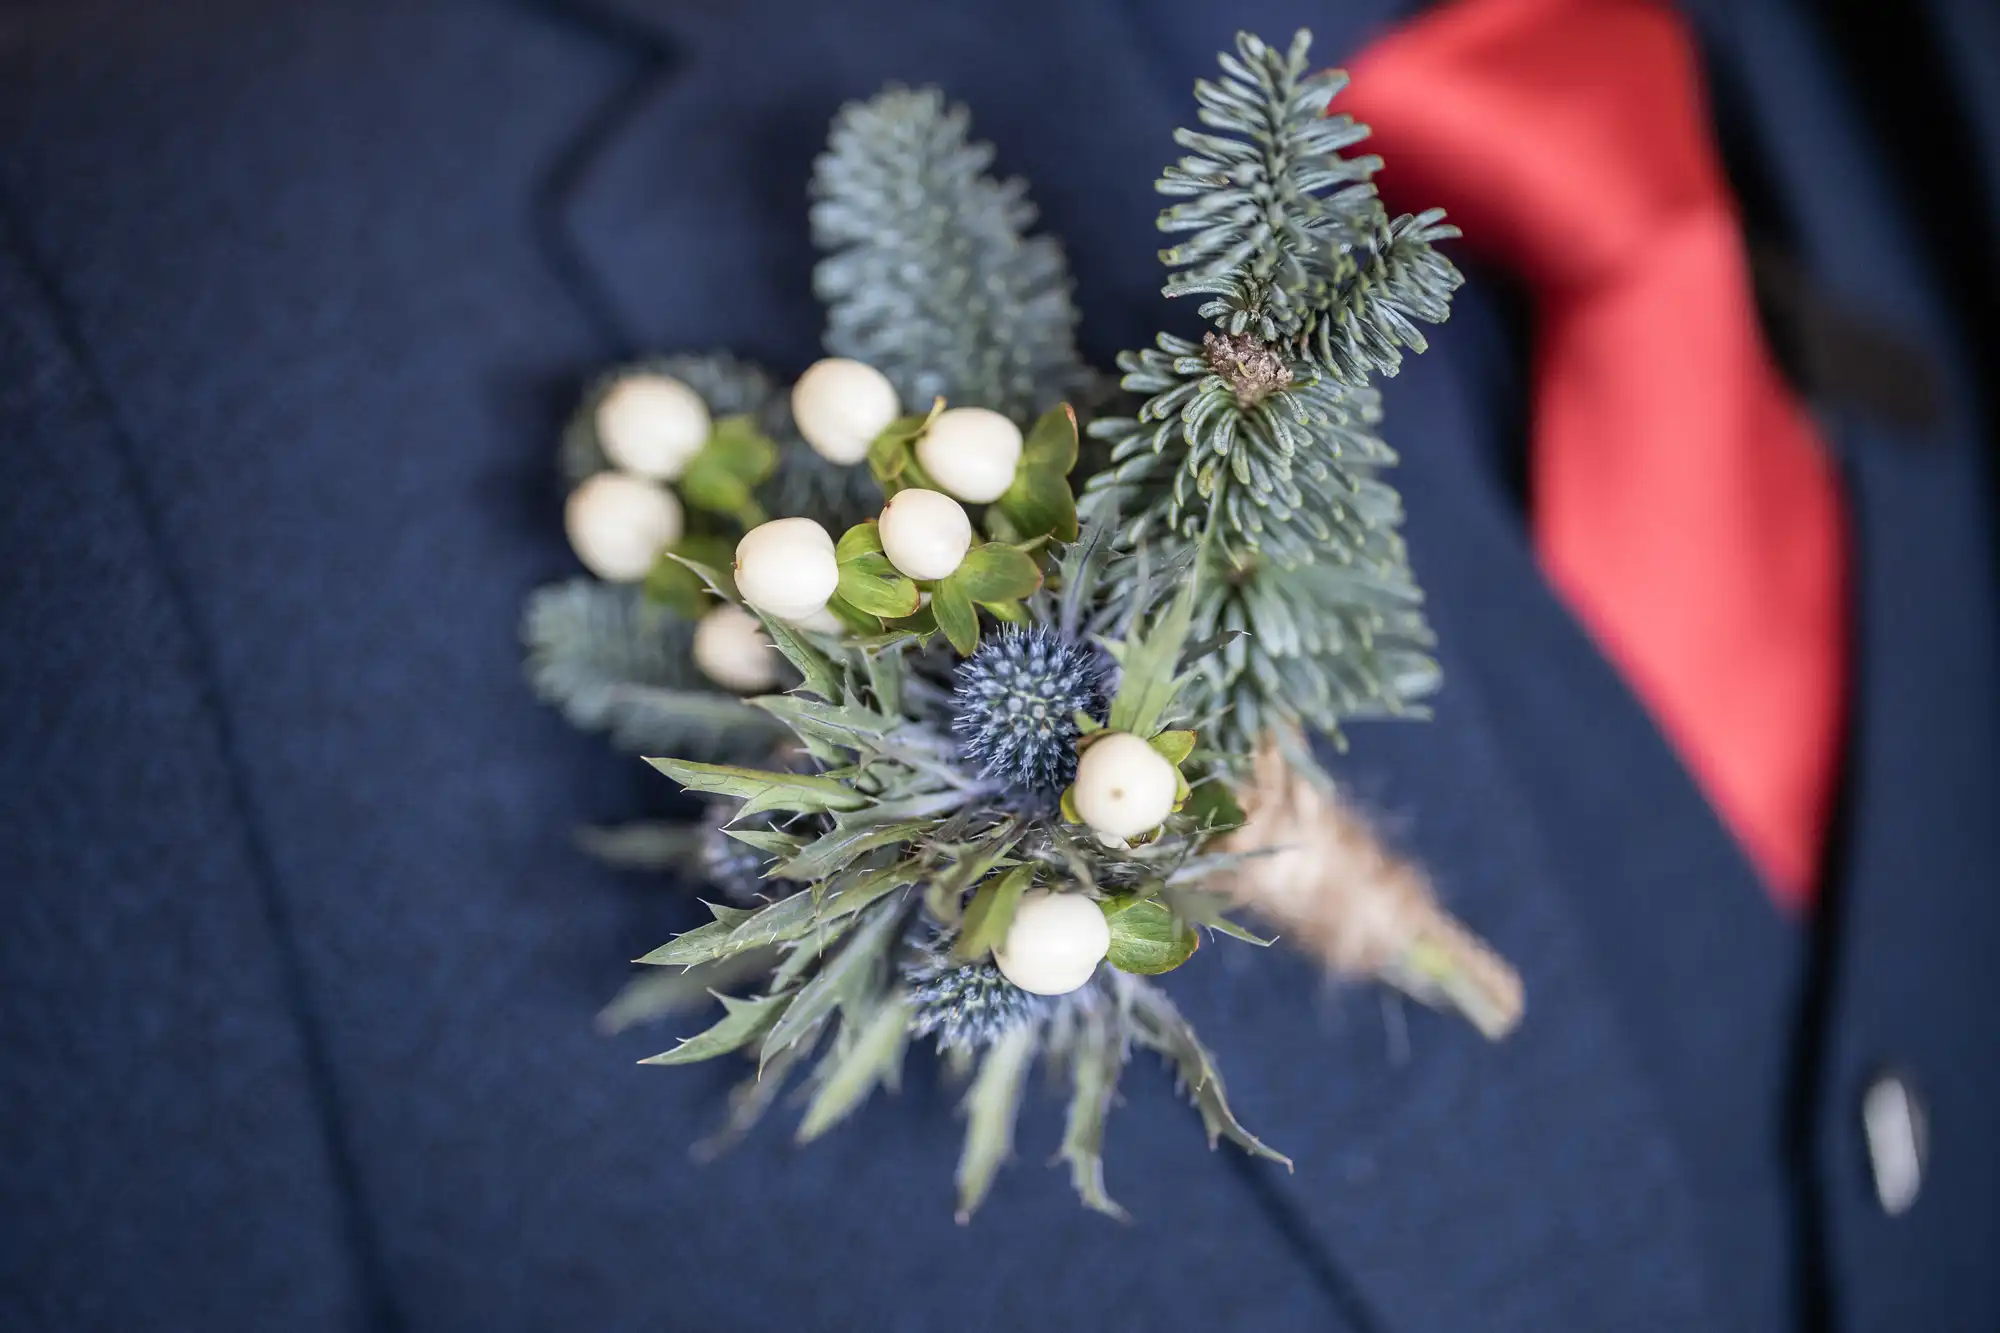 Close-up of a man's suit jacket with a floral boutonniere made of greenery, white berries, and small blue flowers pinned to the left side lapel. He wears a red tie.